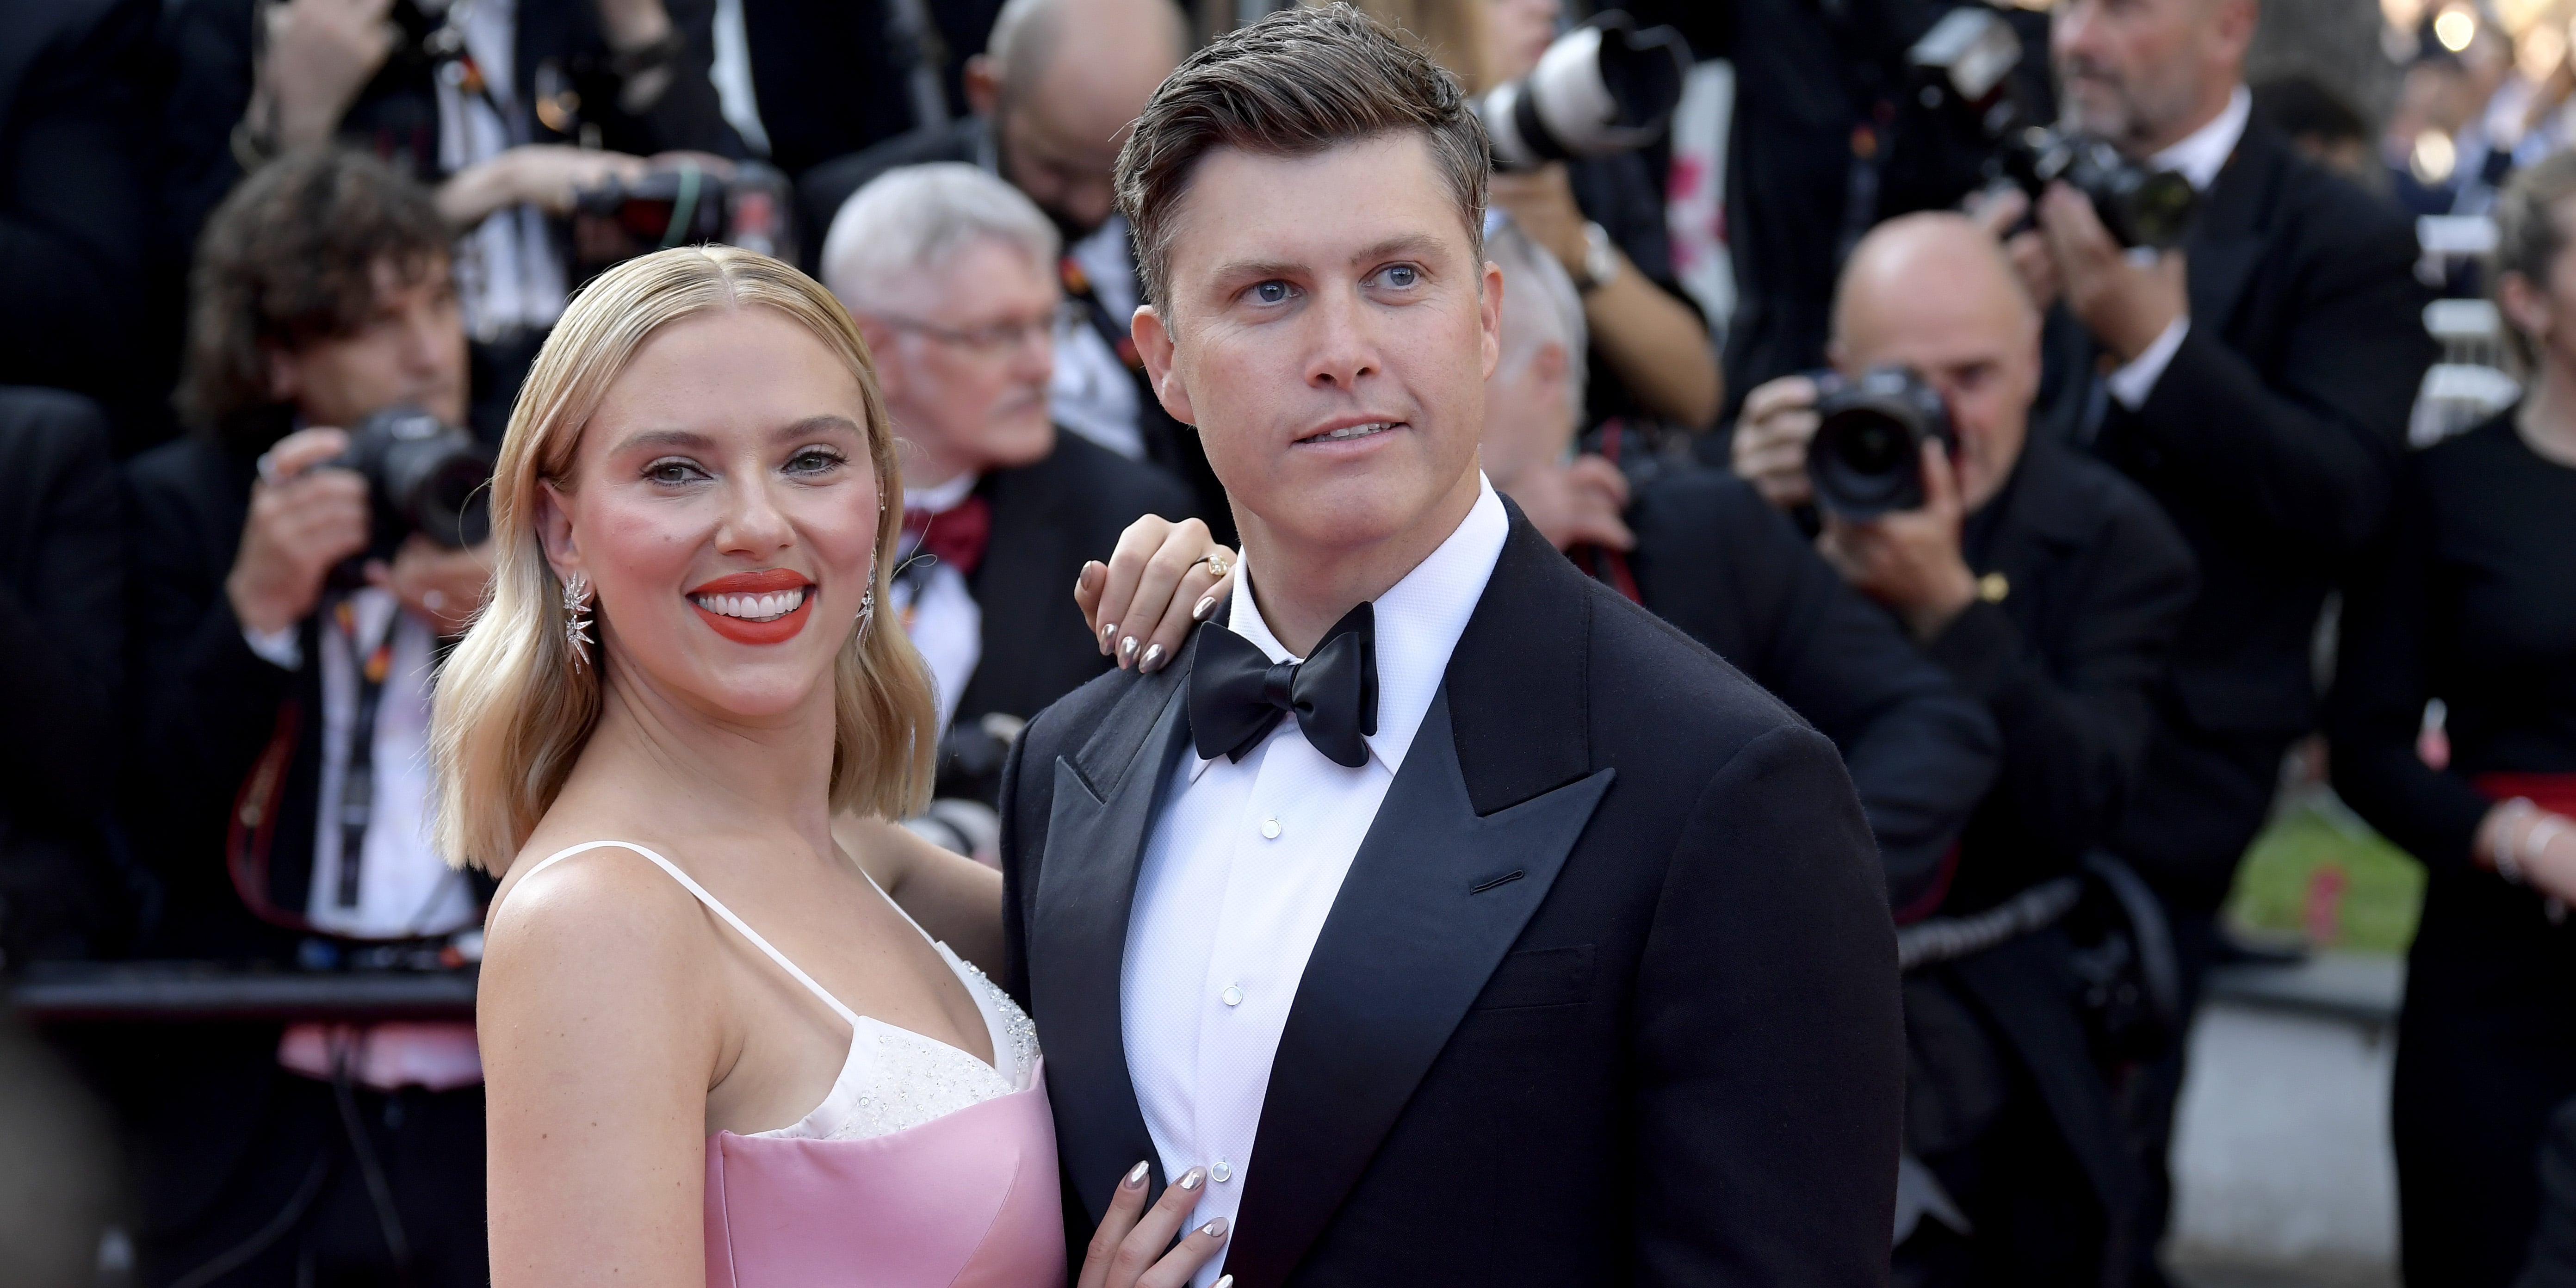 Scarlett Johansson on Why She Was 'Protective' of Her Two Pregnancies